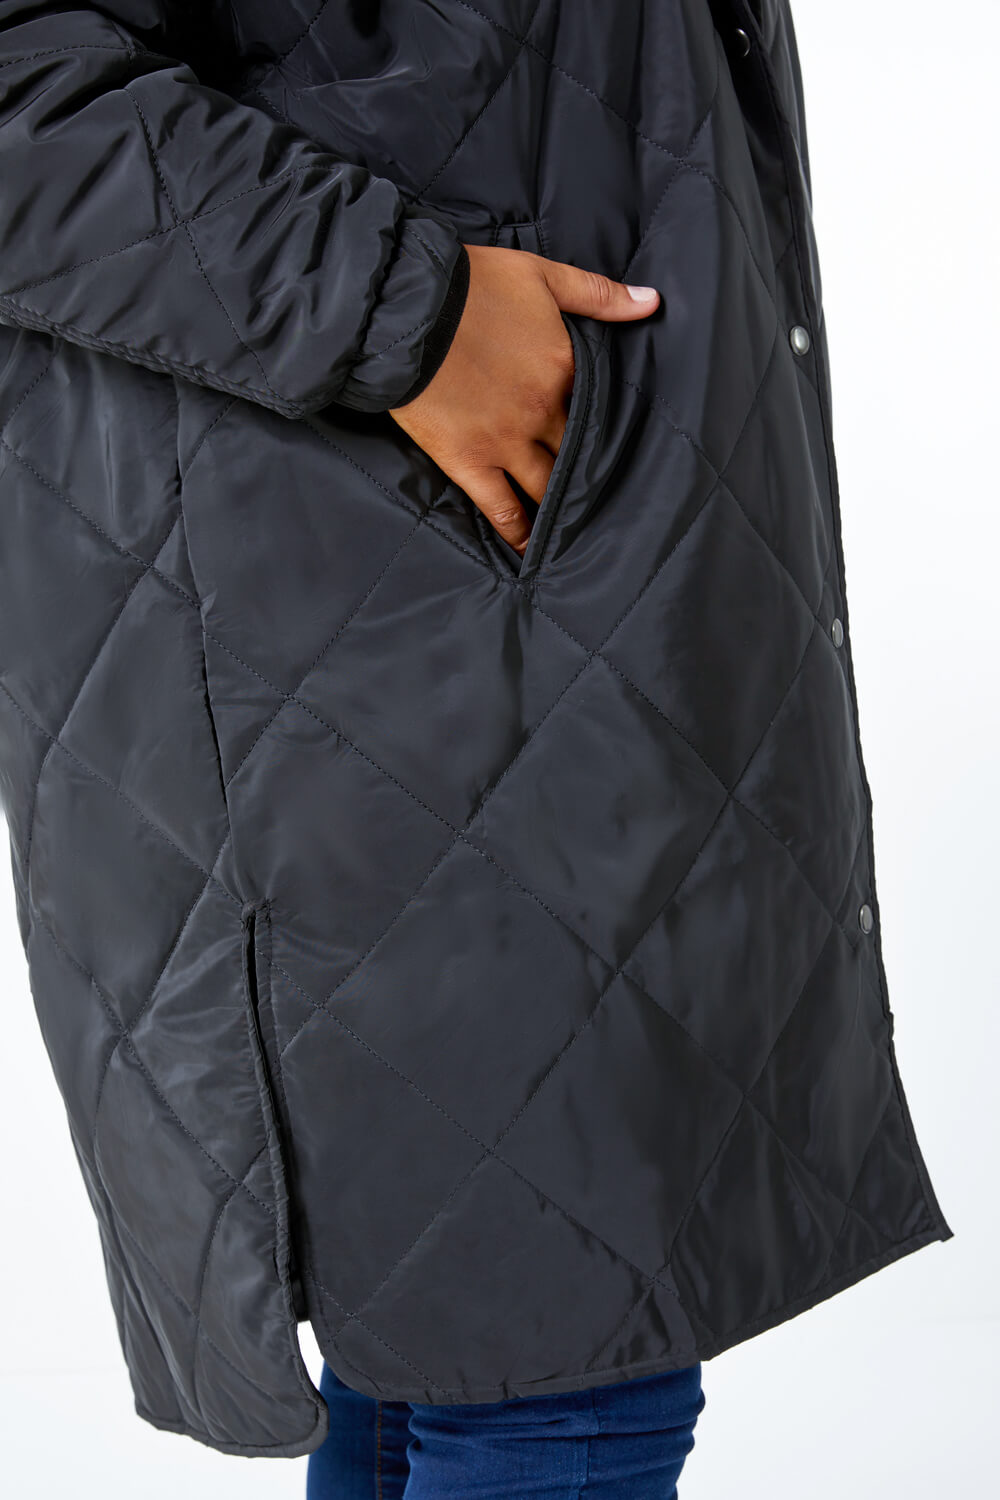 Black Curve Quilted Longline Coat, Image 5 of 5